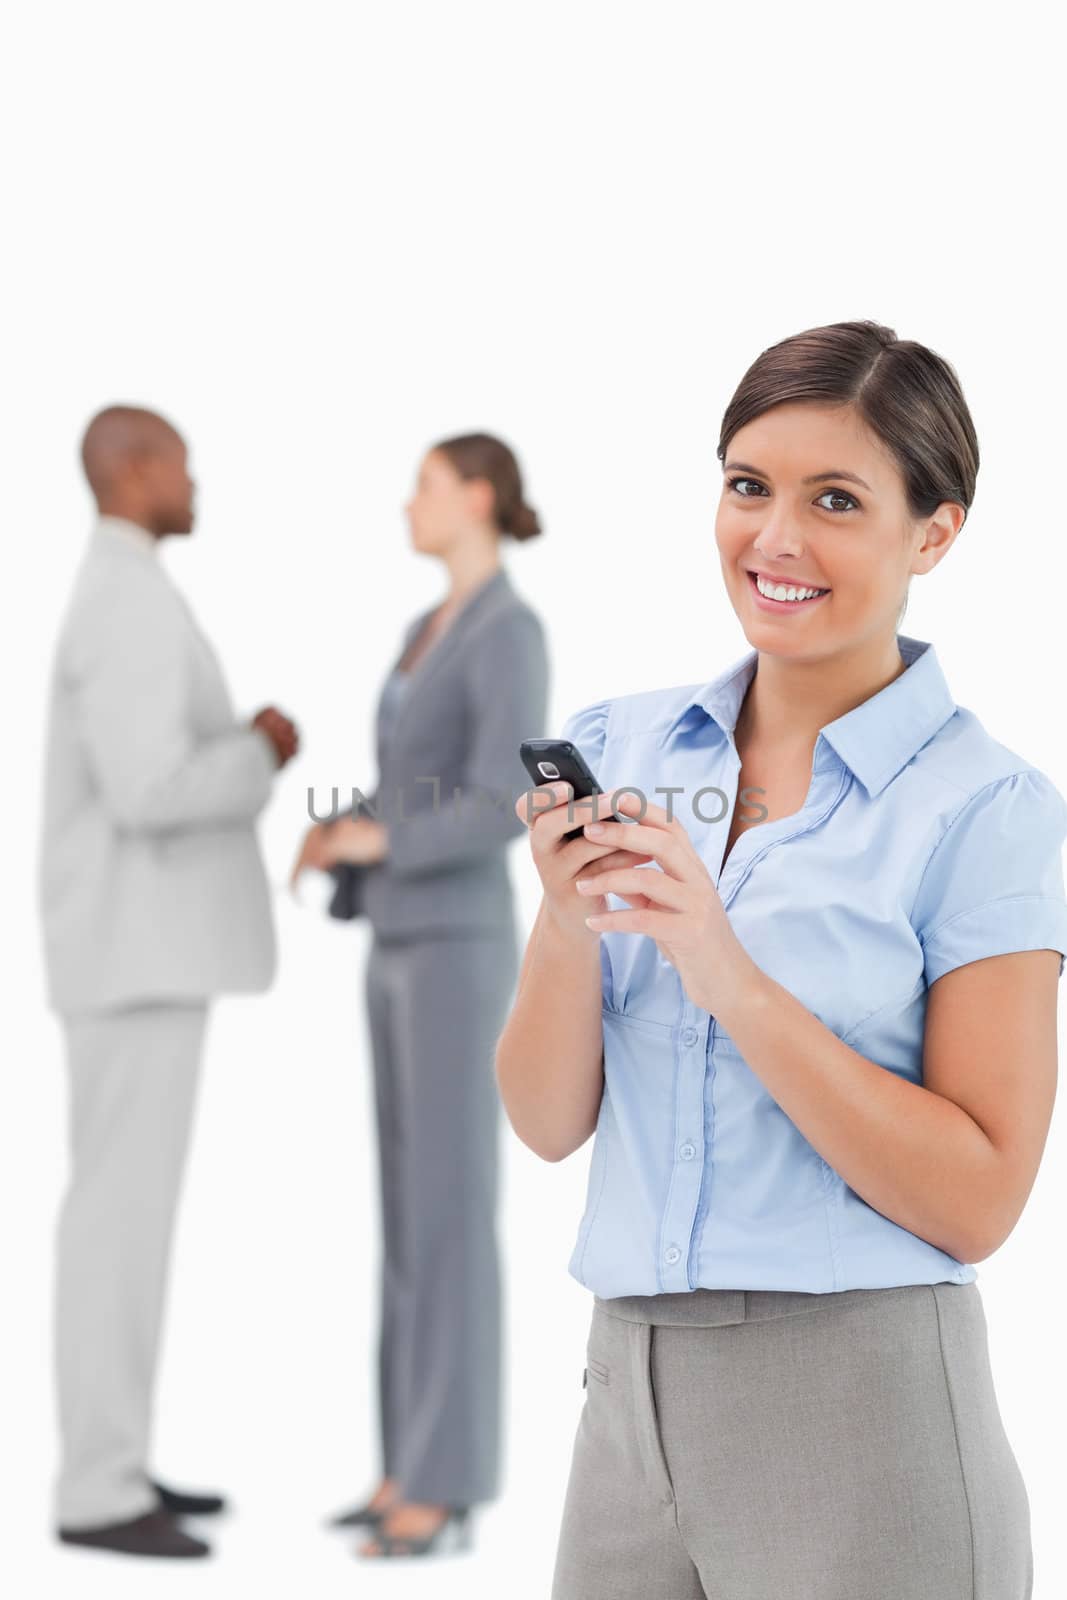 Smiling tradeswoman with cellphone and associates behind her against a white background